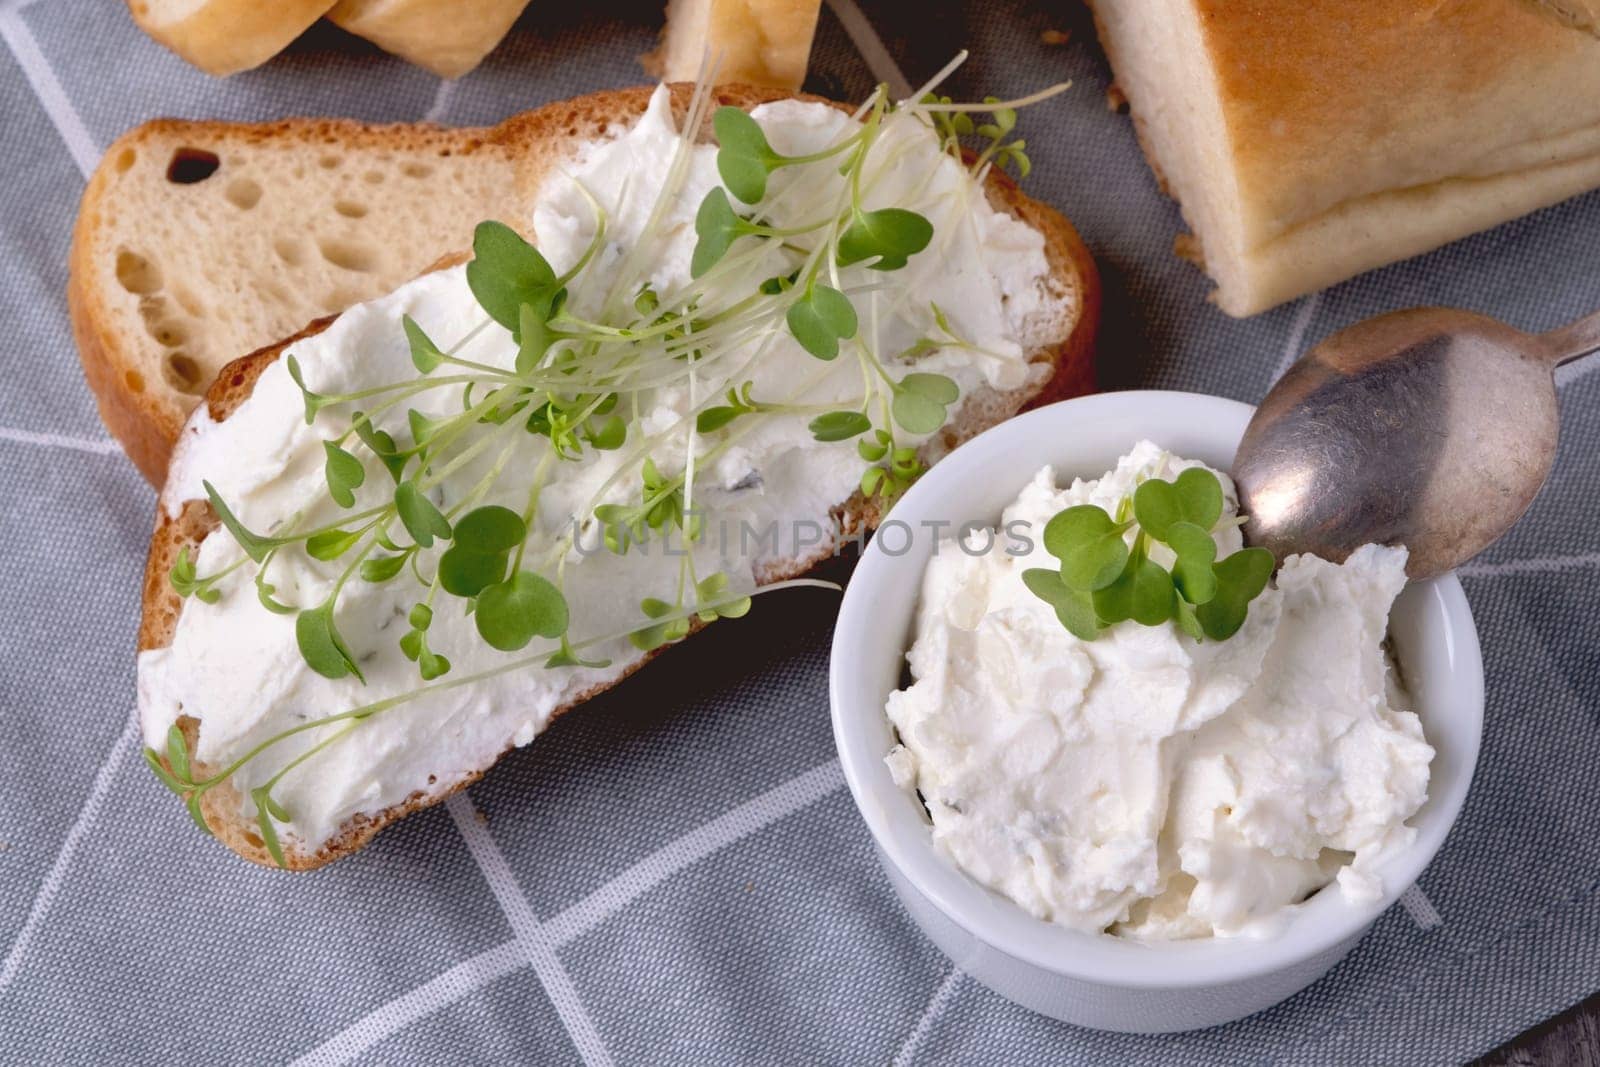 Sandwich with cottage cheese. Healthy eating concept.